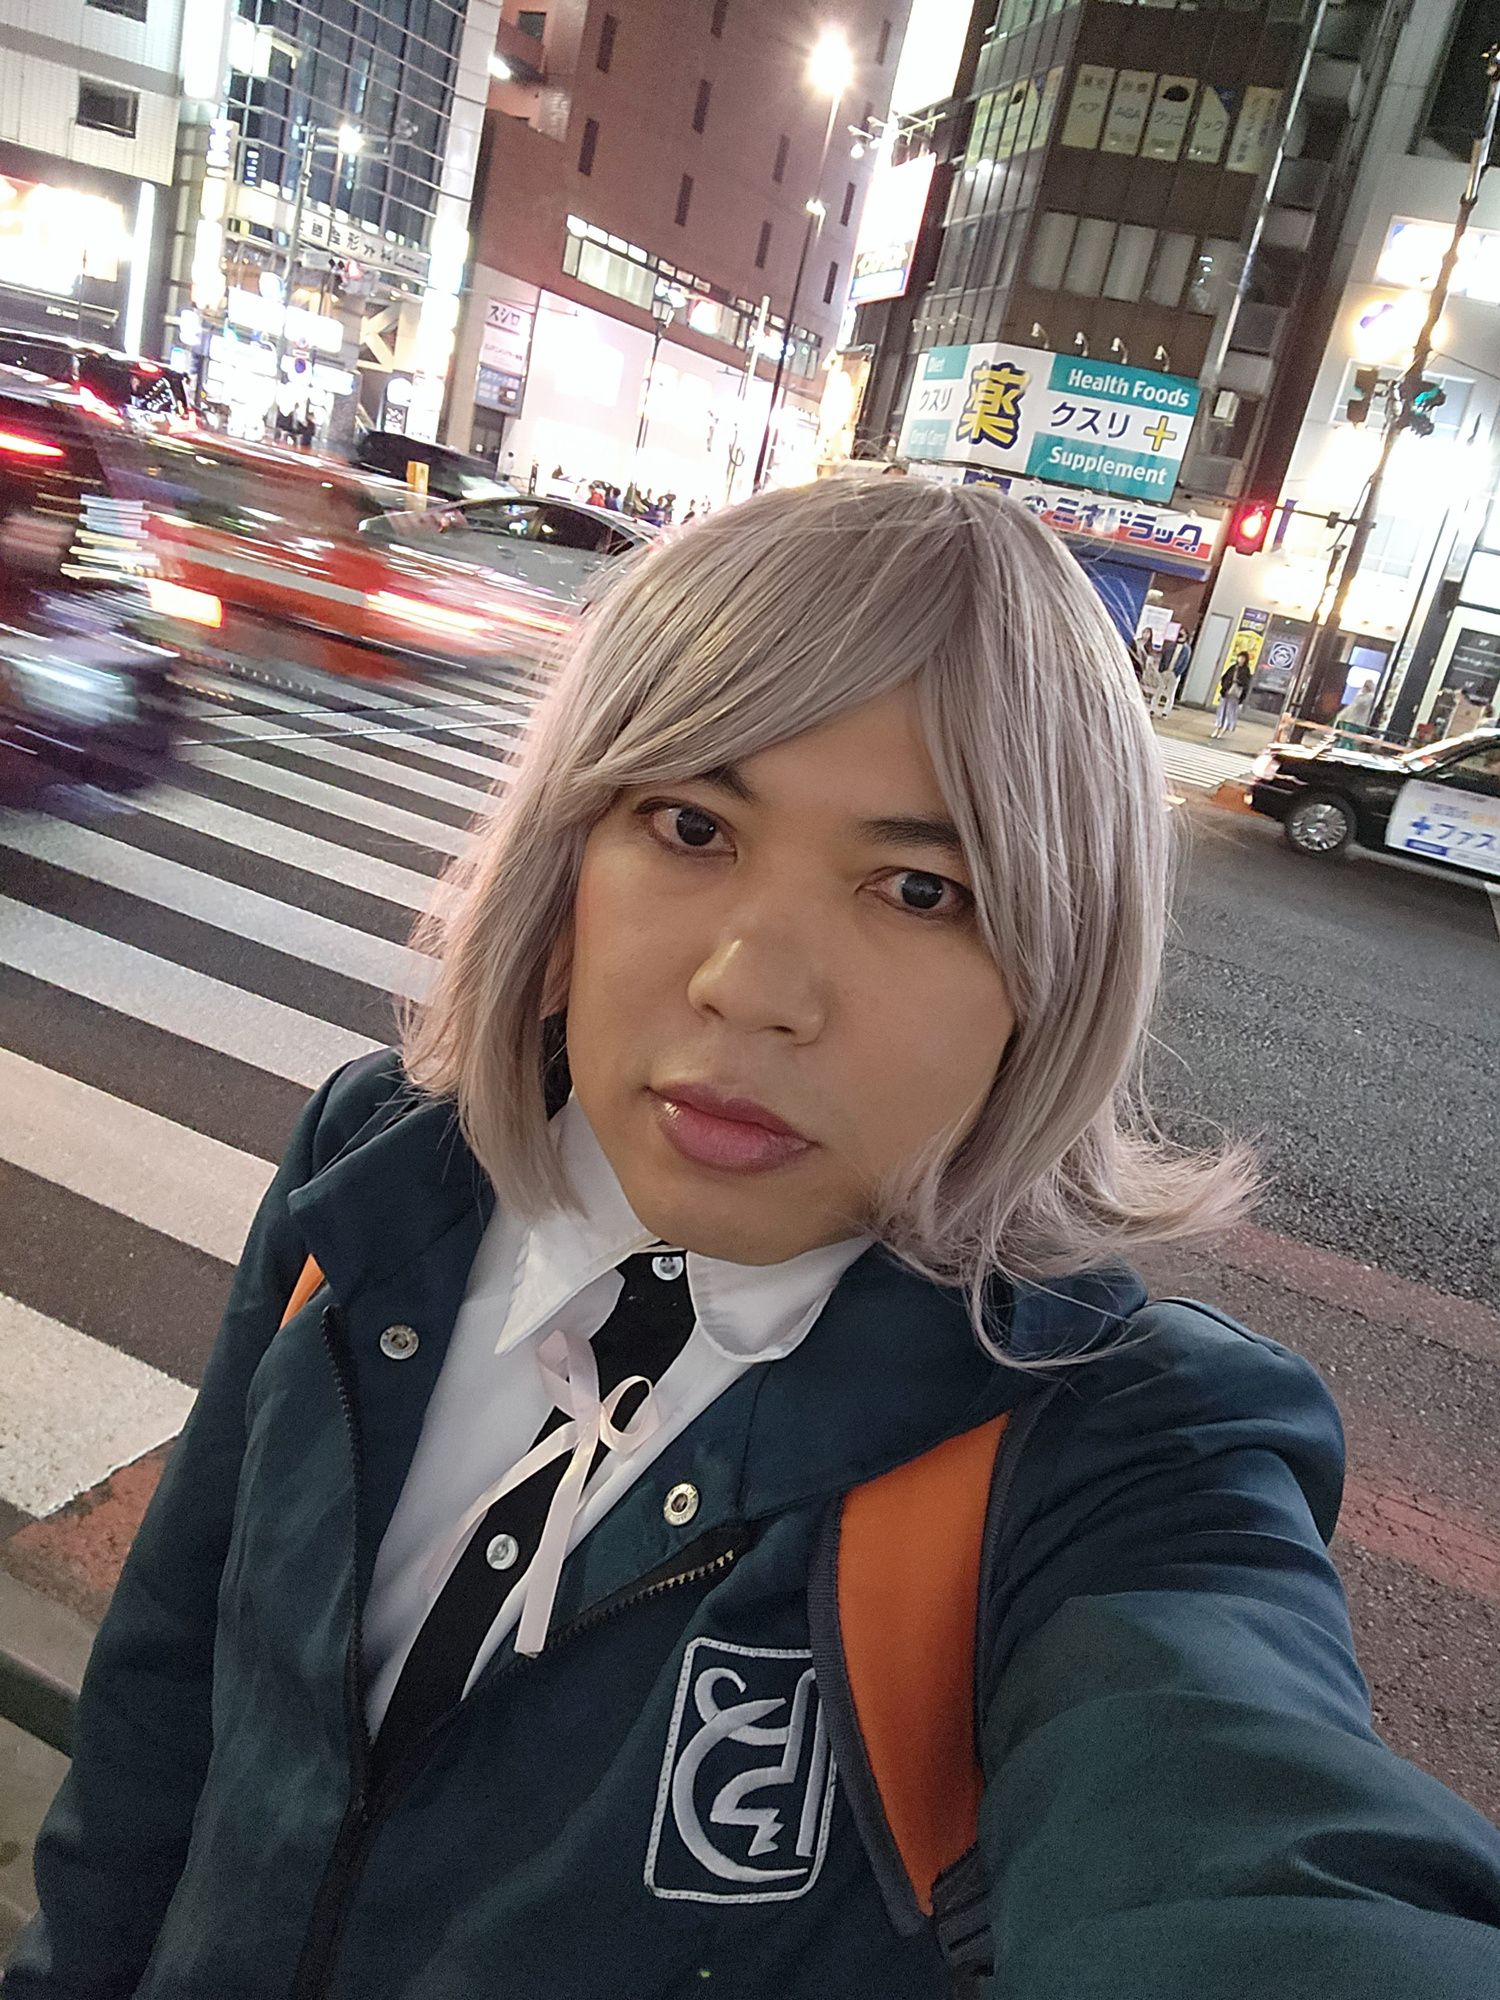 Jessica Public Cosplay in Tokyo #13